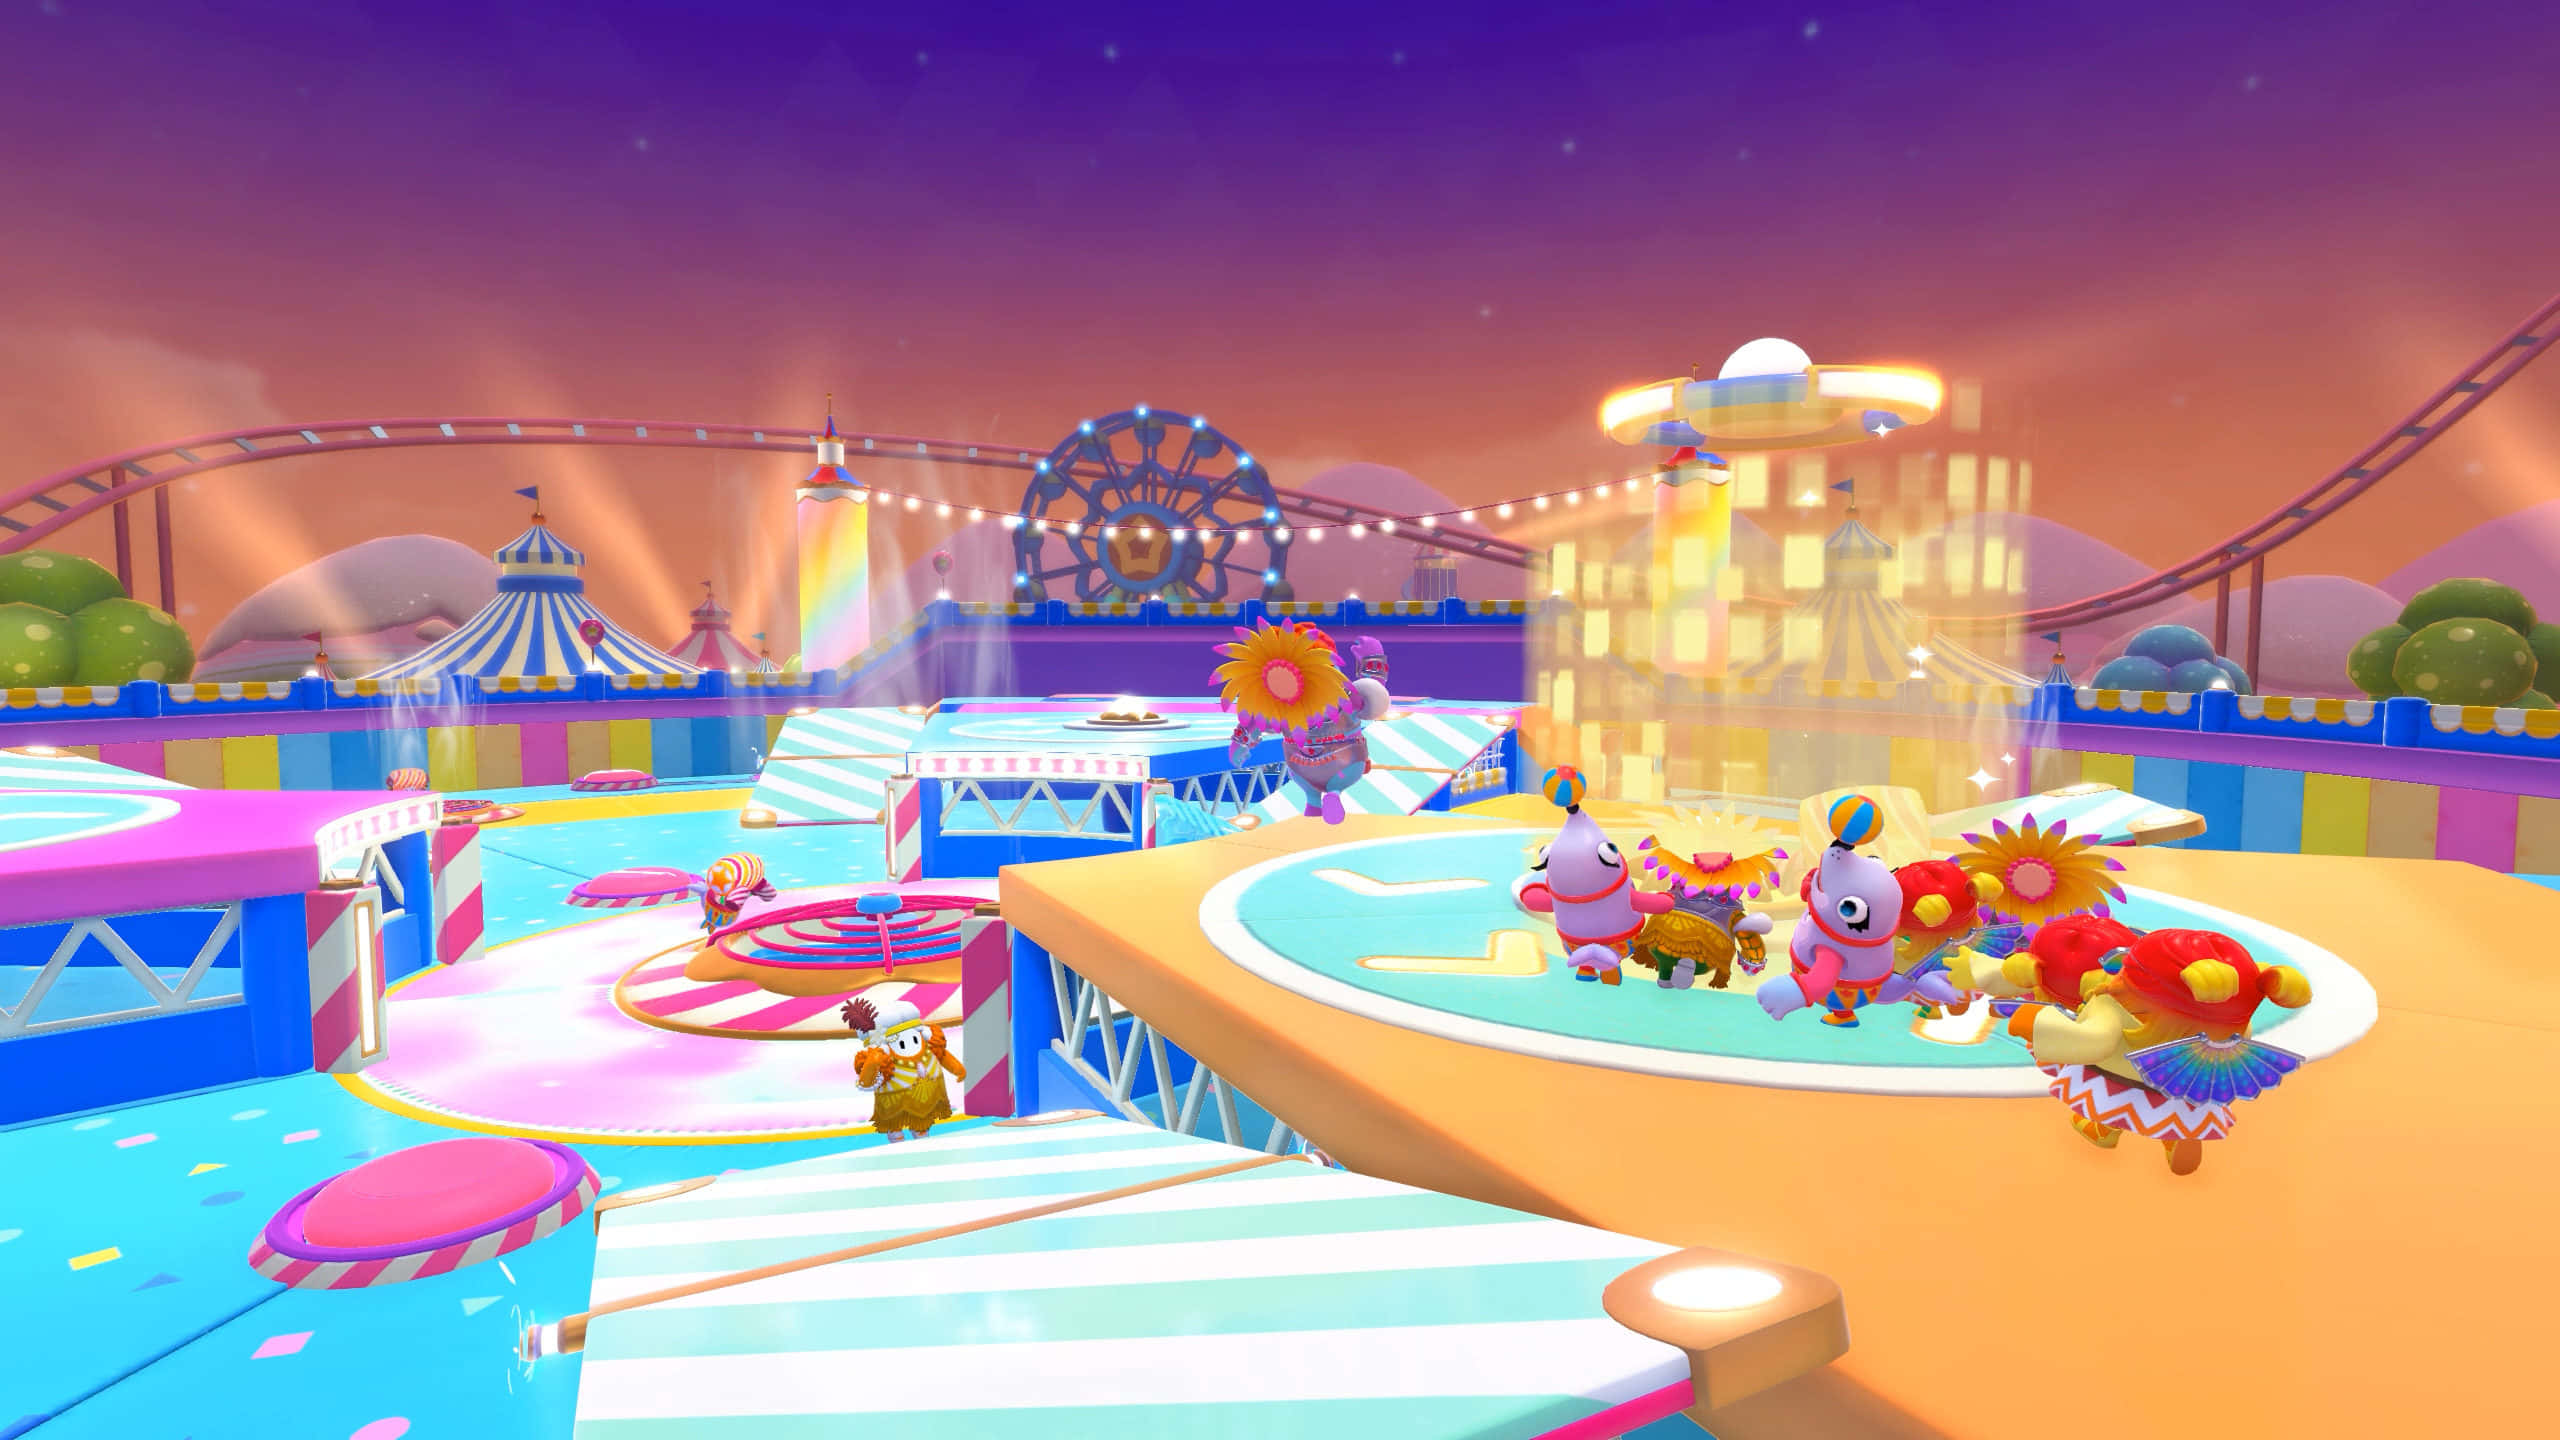 A Screenshot Of A Video Game With A Carnival Theme